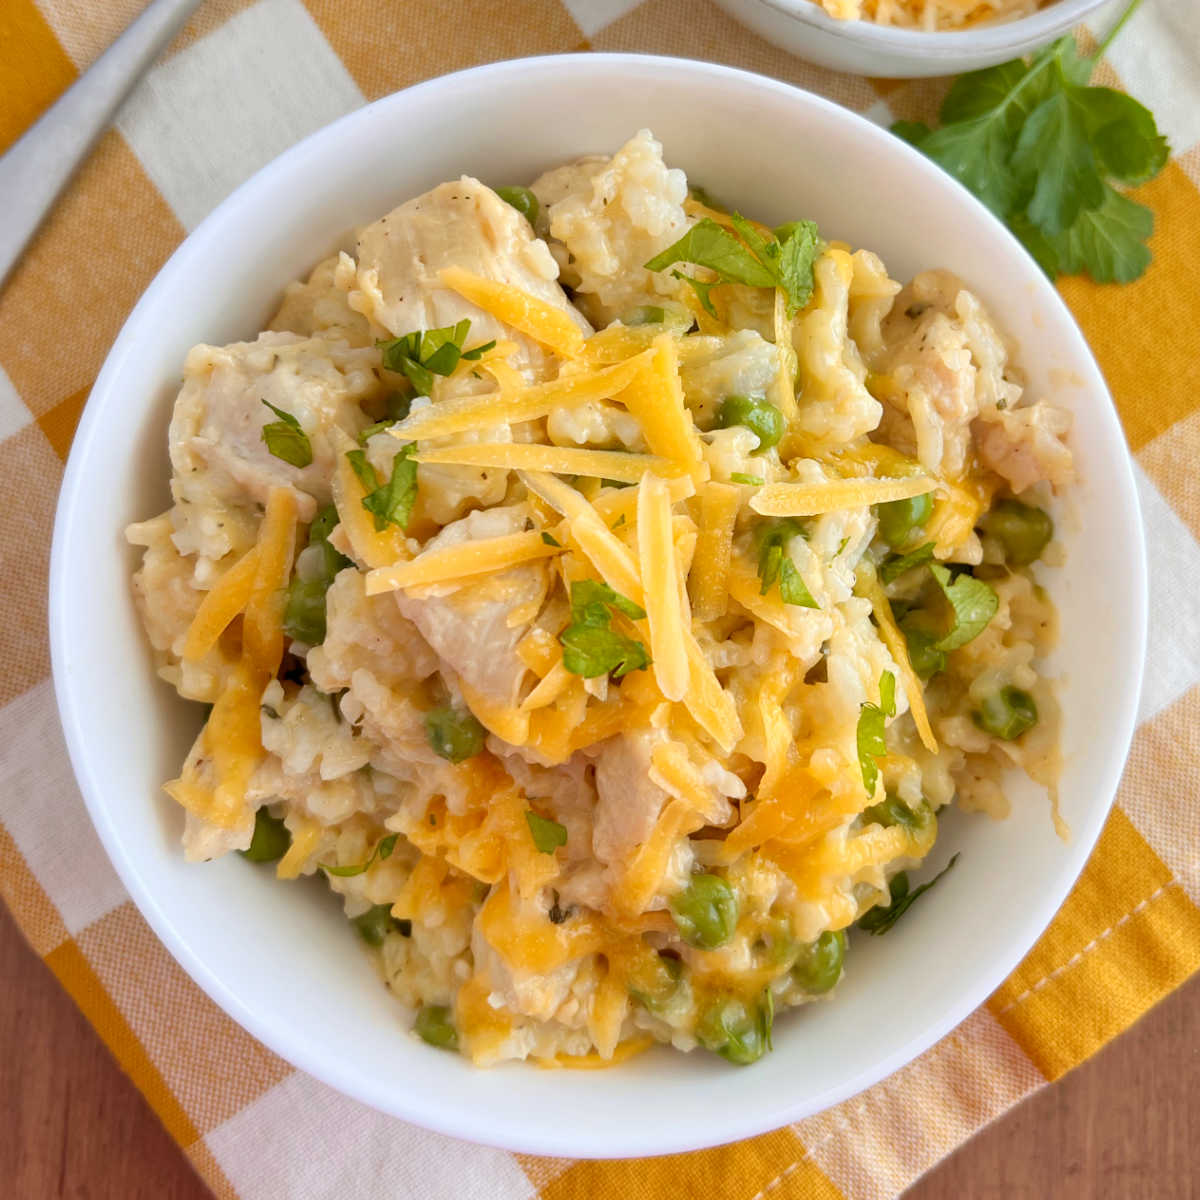 https://meatloafandmelodrama.com/wp-content/uploads/2022/02/instant-pot-cheesy-chicken-and-rice-square.jpeg